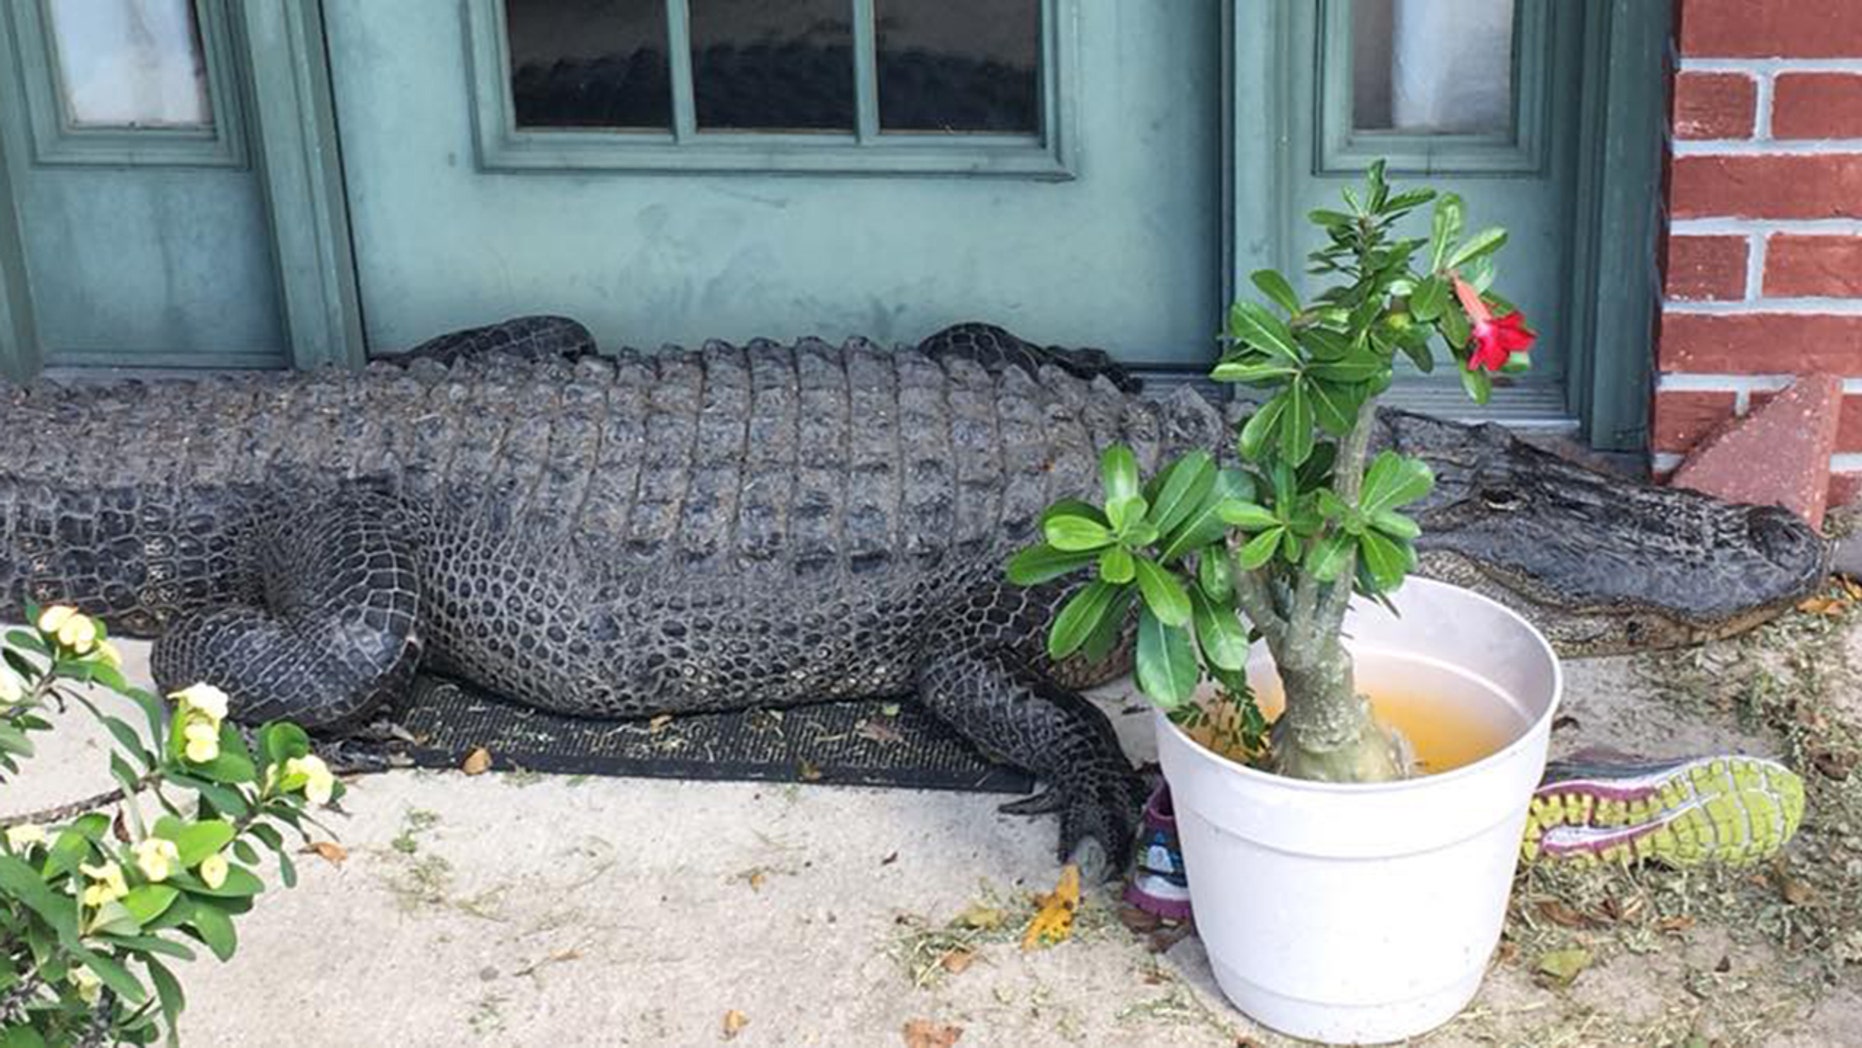 A big alligator was seen outside a house in Louisiana last week, MPs said.